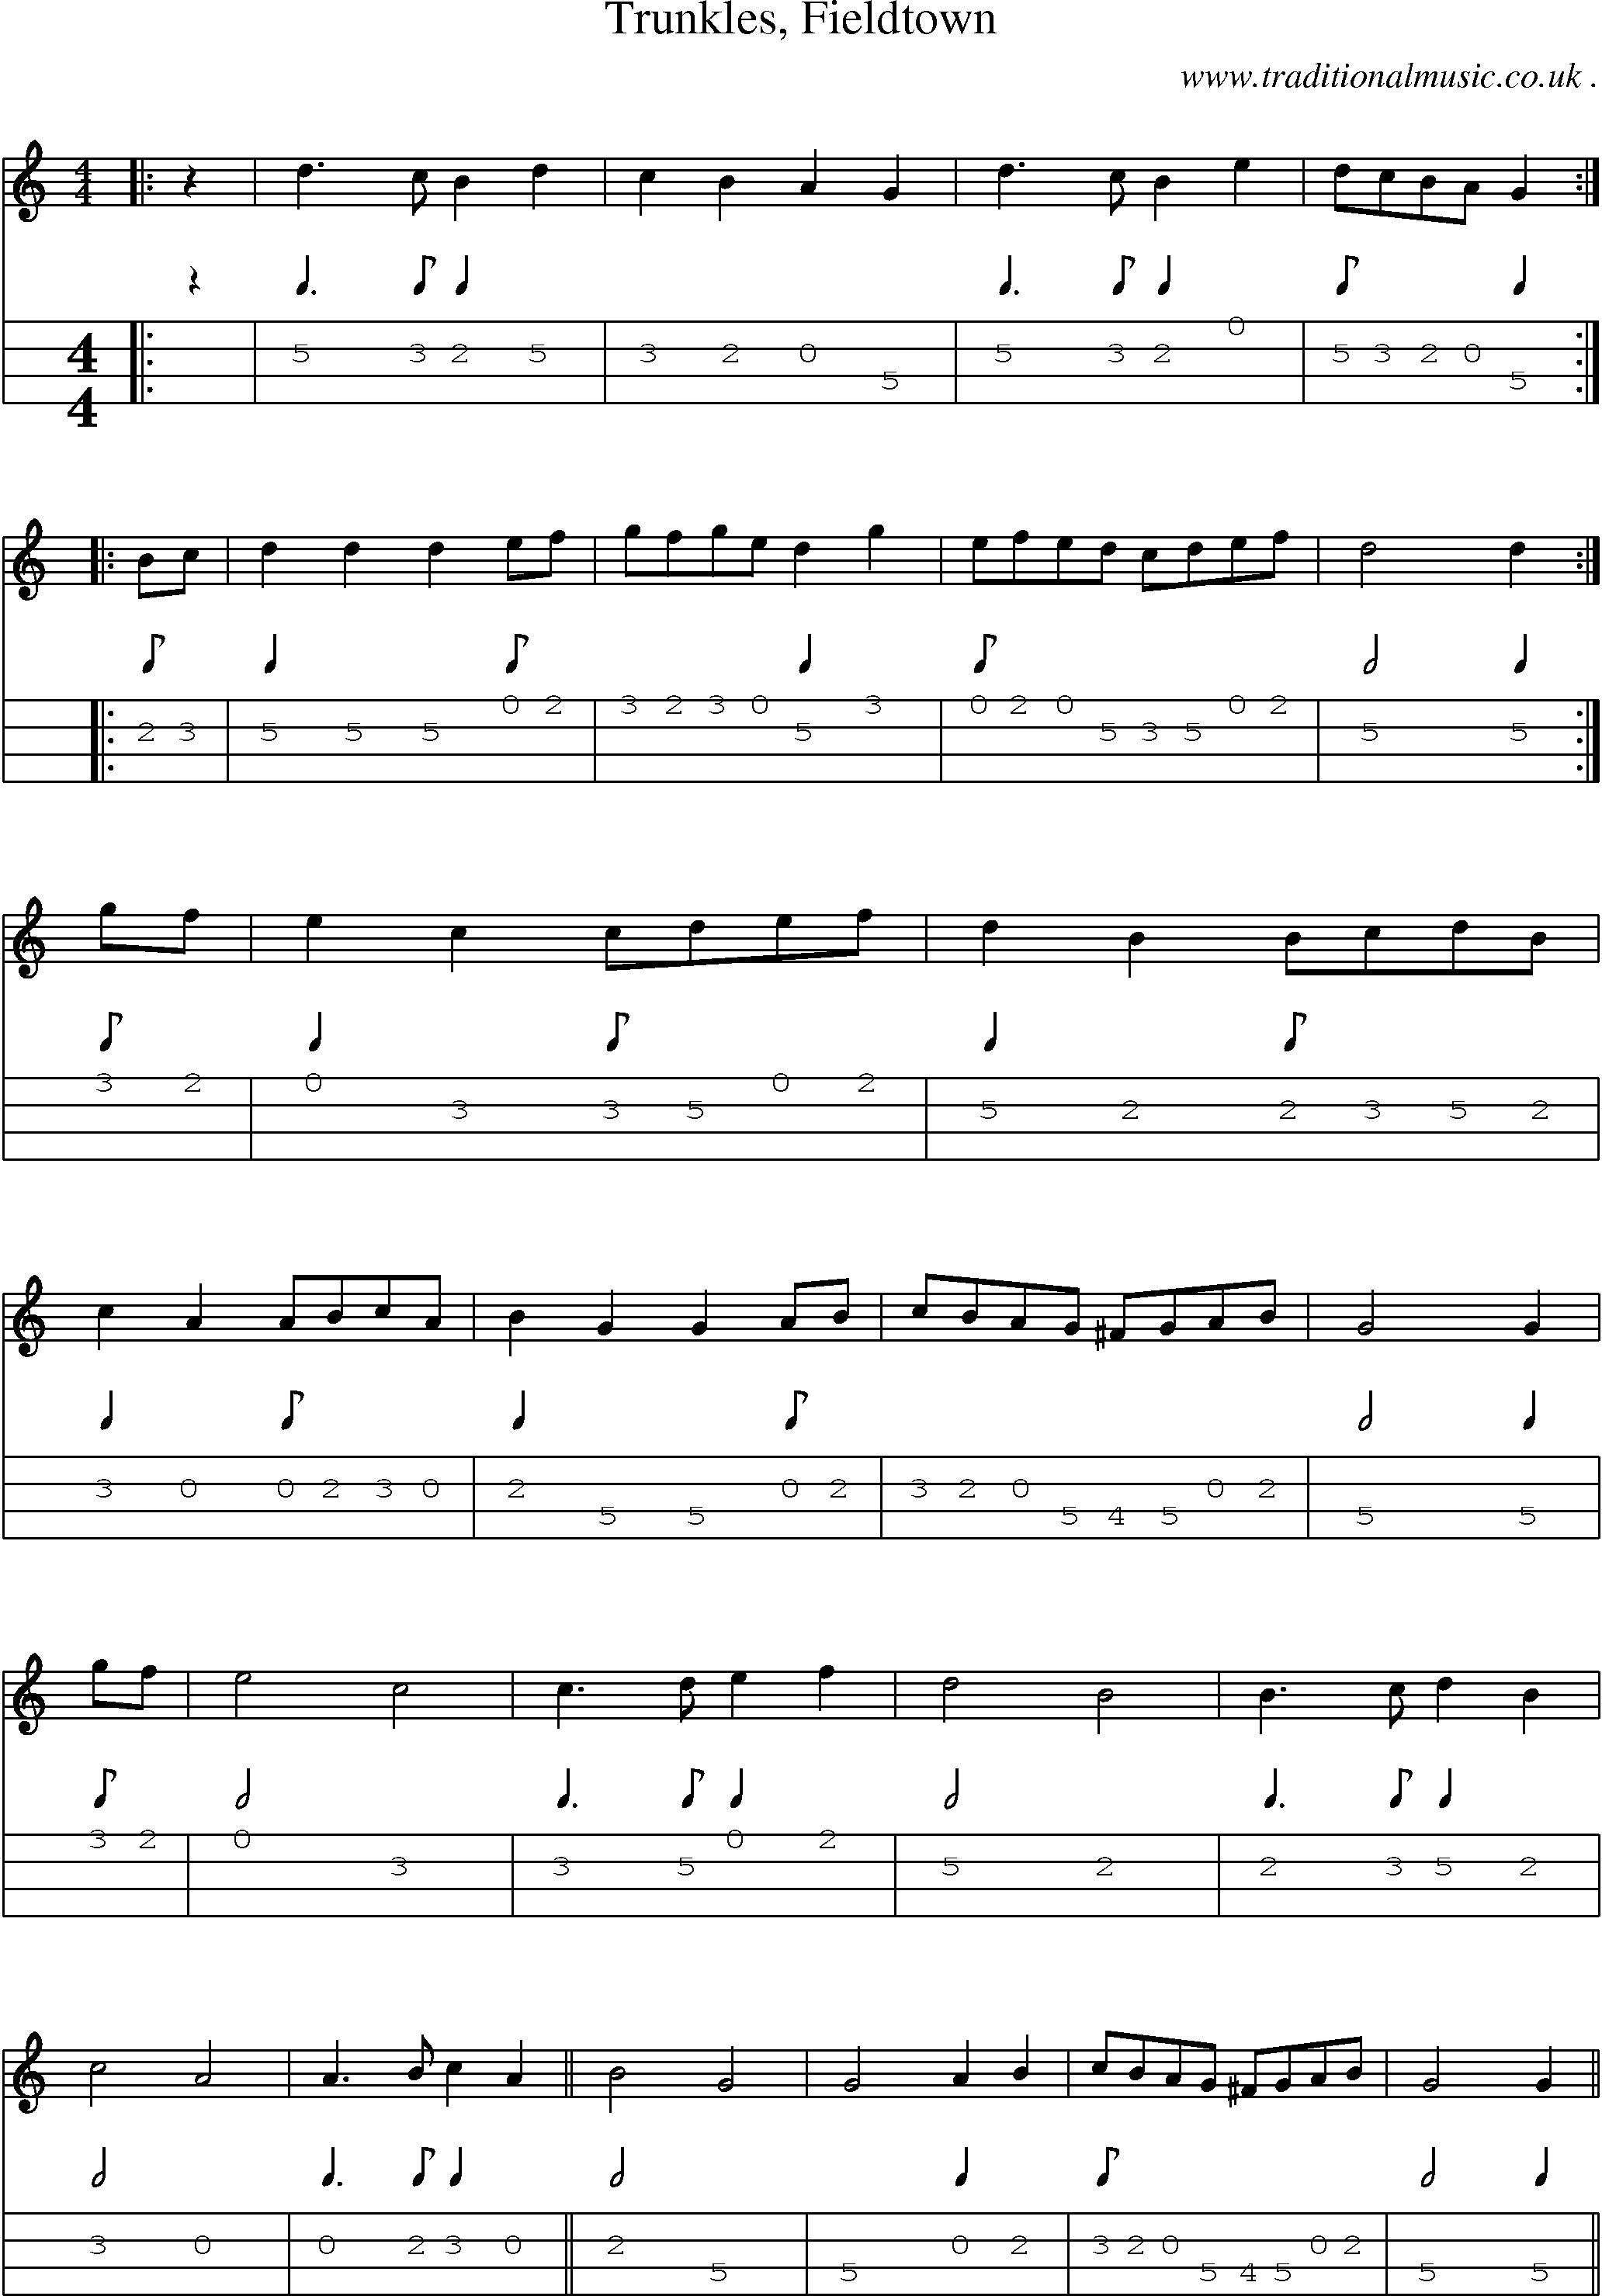 Sheet-Music and Mandolin Tabs for Trunkles Fieldtown